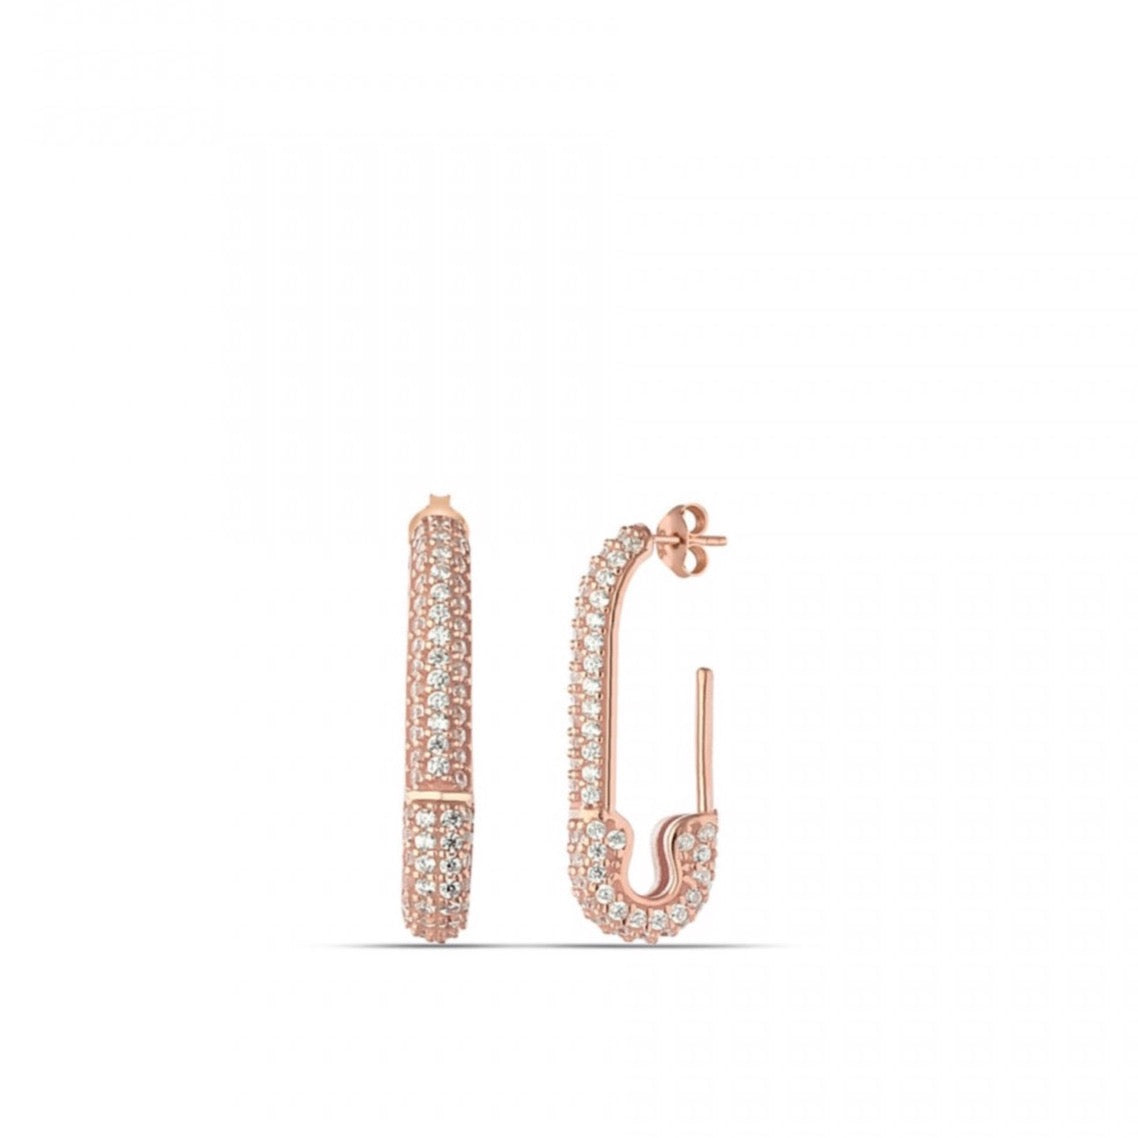 Pave Stud Safety Pin Earring Jewelled Sterling Silver